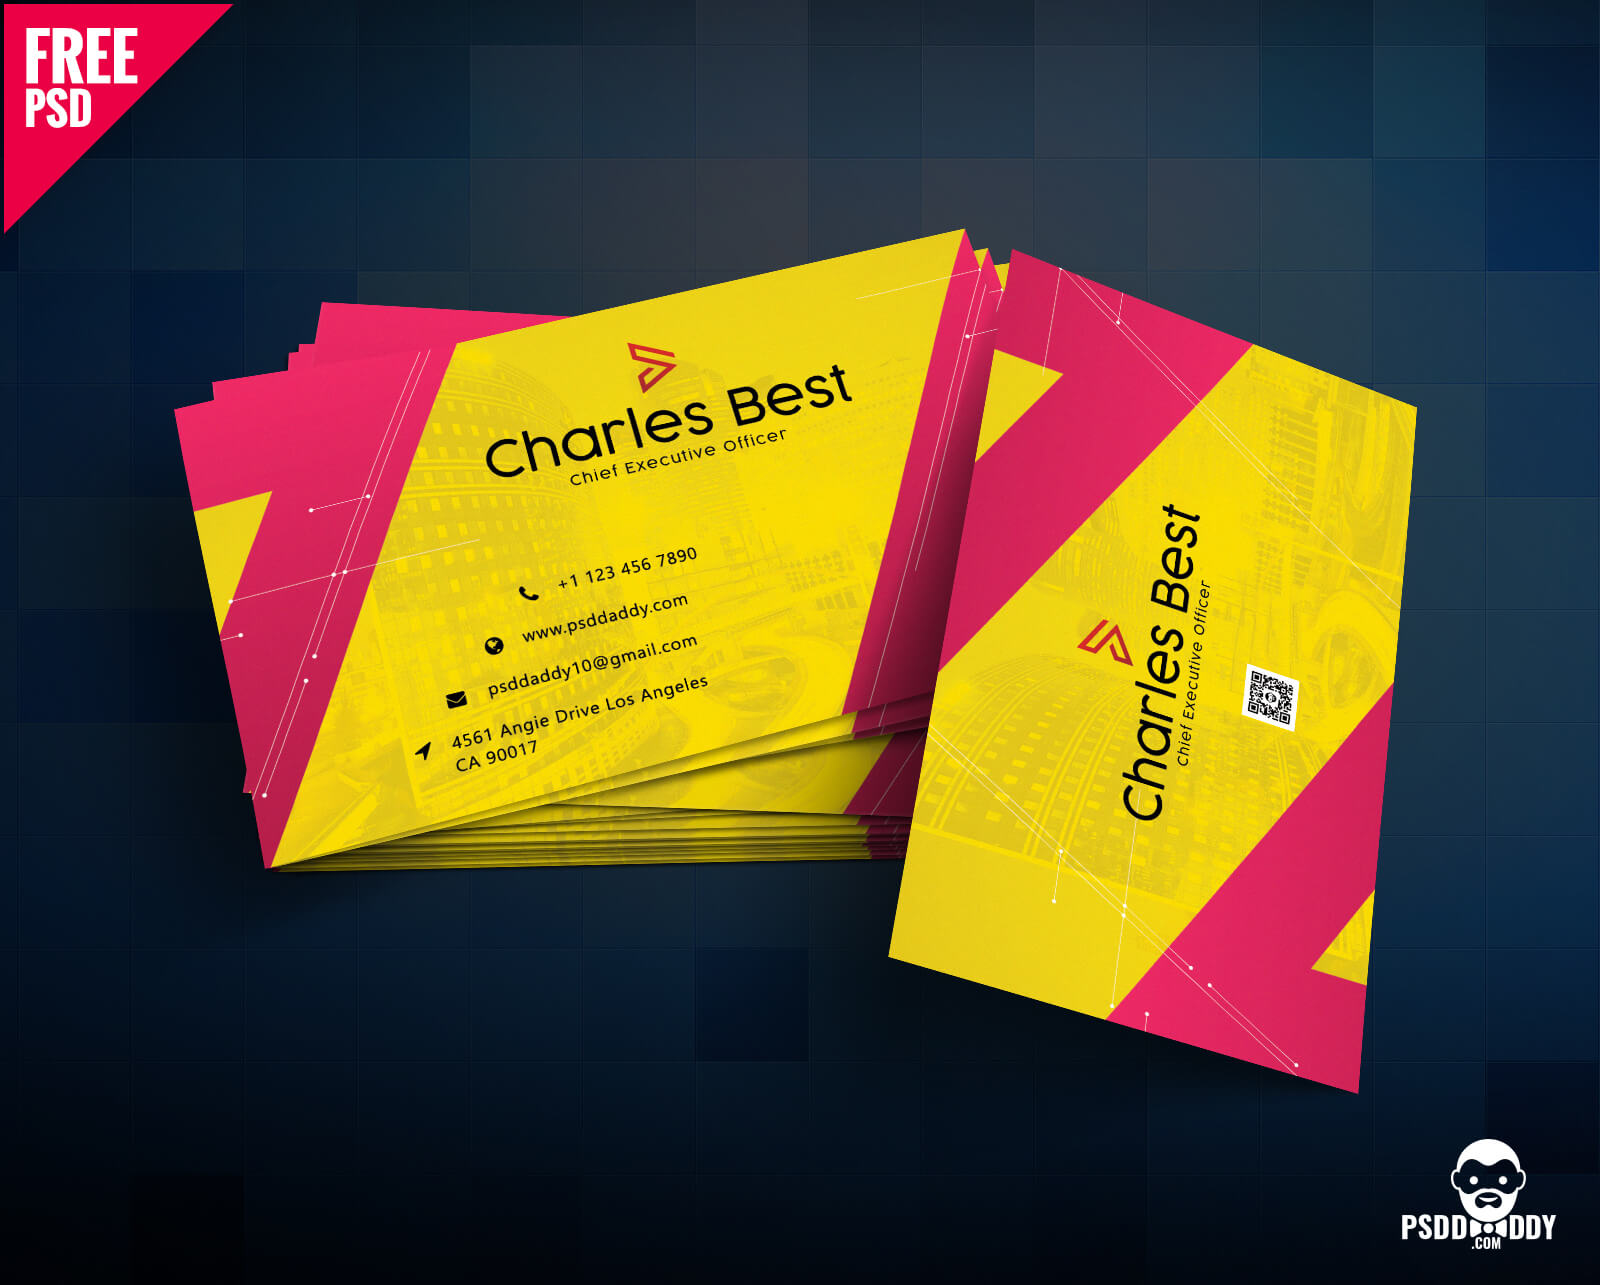 Download] Creative Business Card Free Psd | Psddaddy With Regard To Business Card Size Photoshop Template